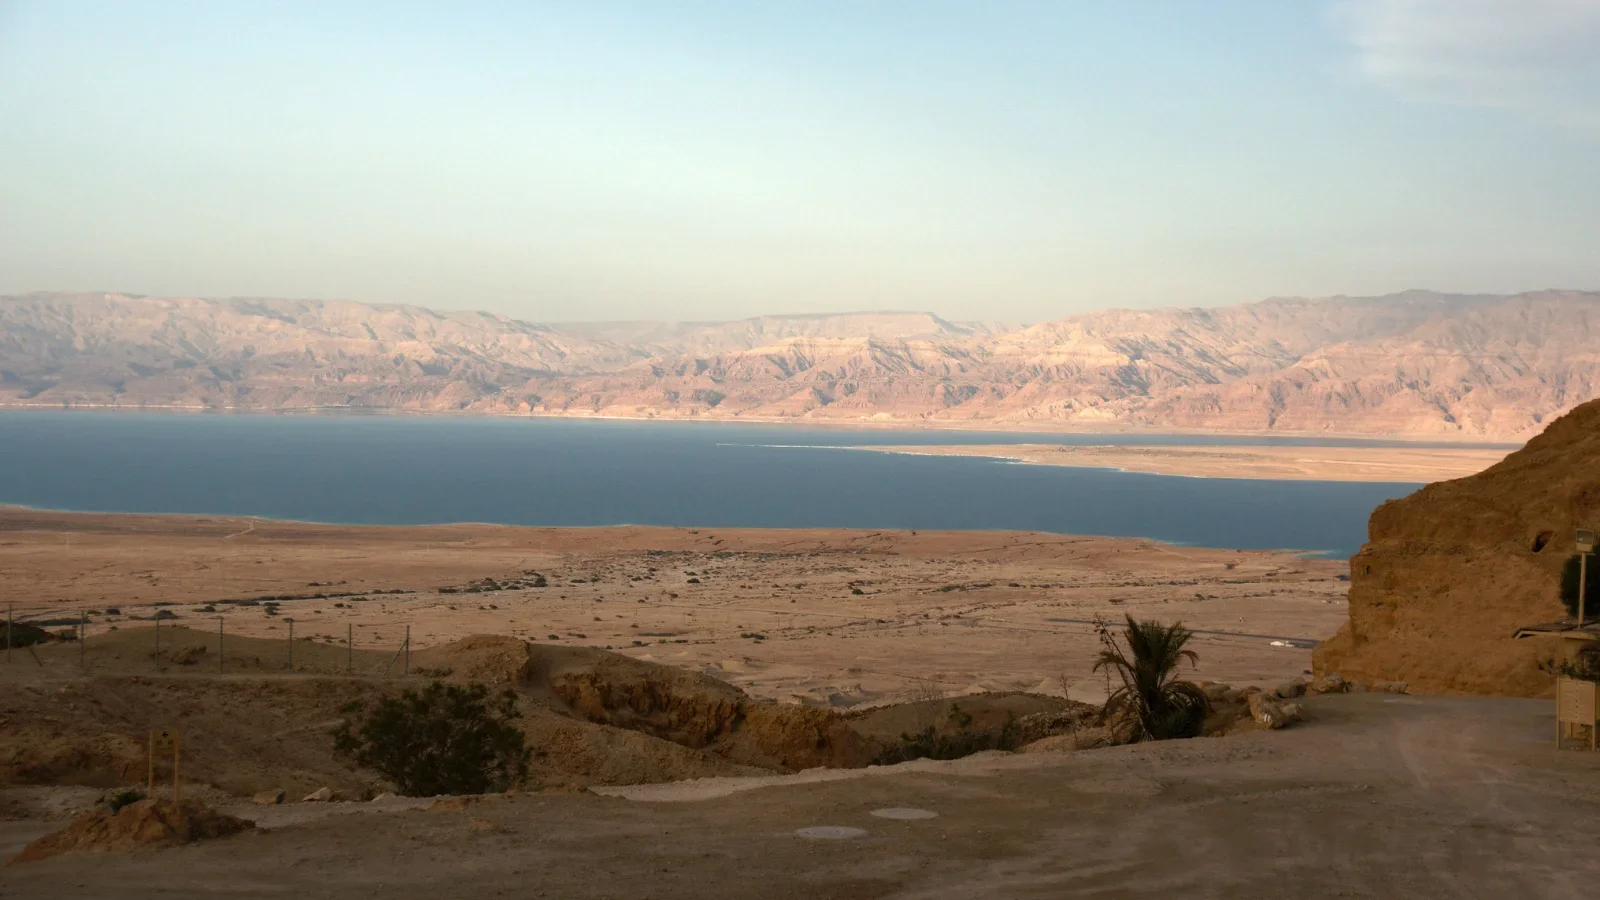 The Town of Masada in Israel